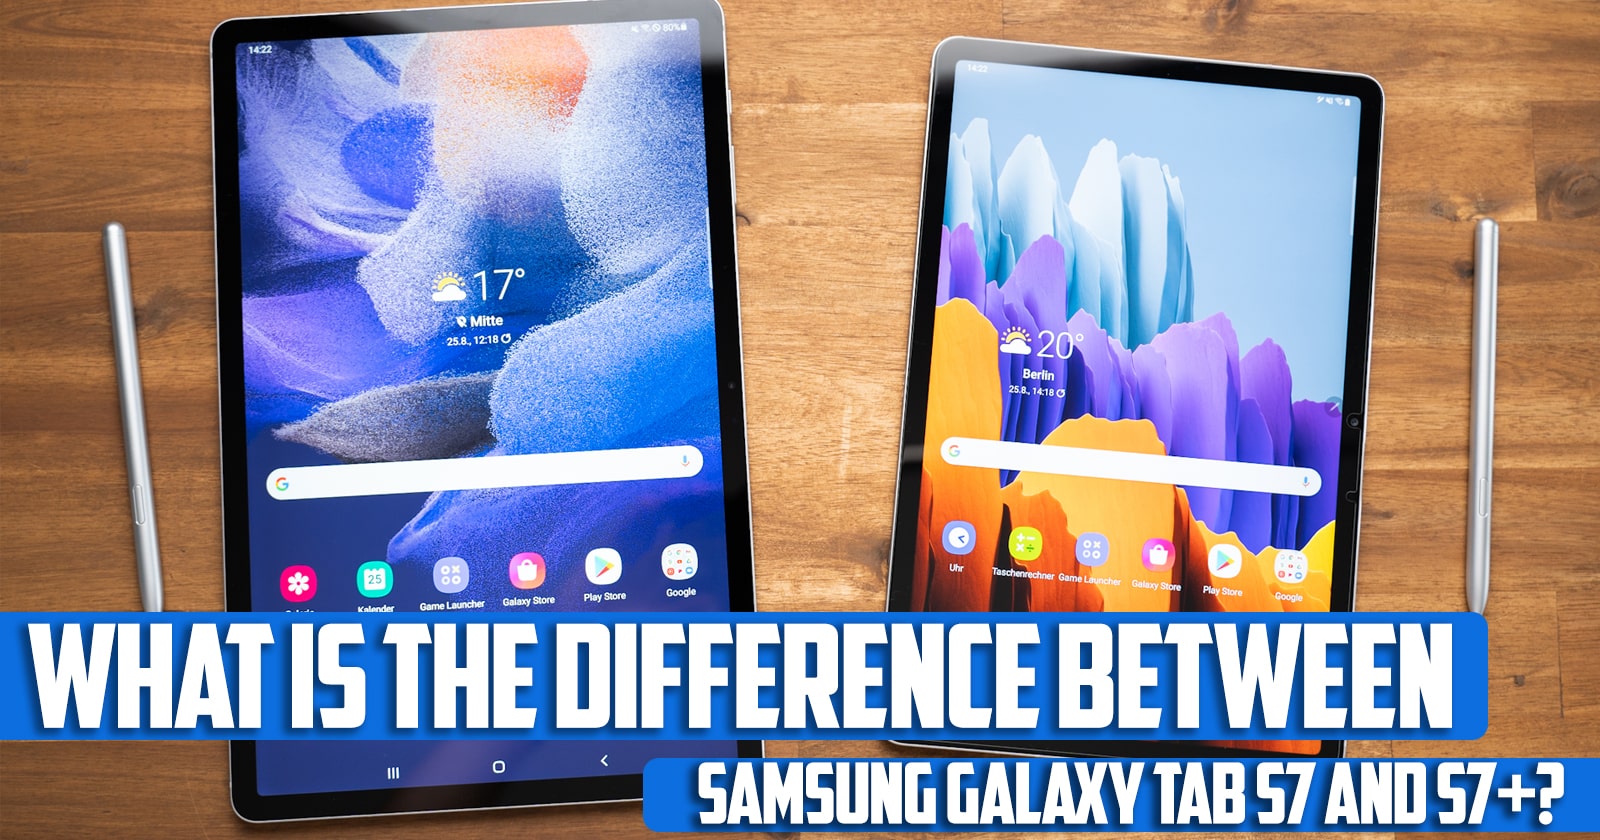 What is the difference between Samsung Galaxy Tab s7 and s7+?